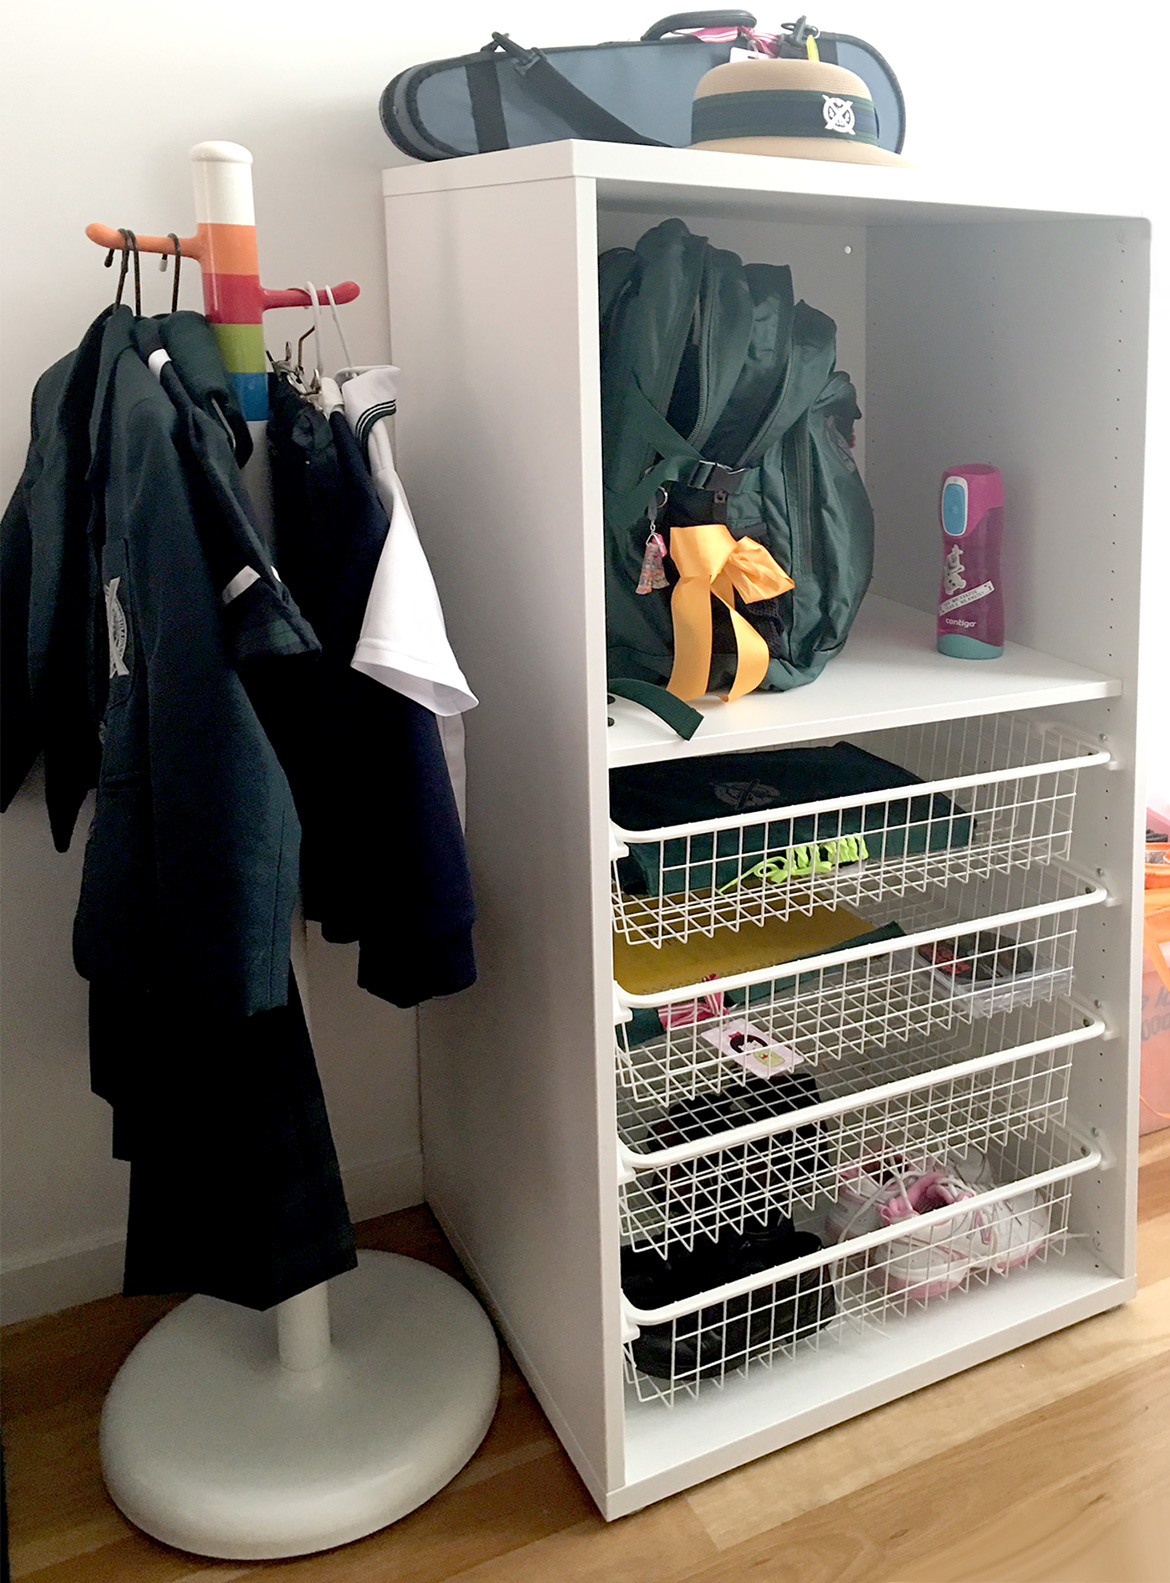 This is a fabulously organised storage unit for the kids school stuff, to keep everything in one place to help keep the school mornings stress free. 